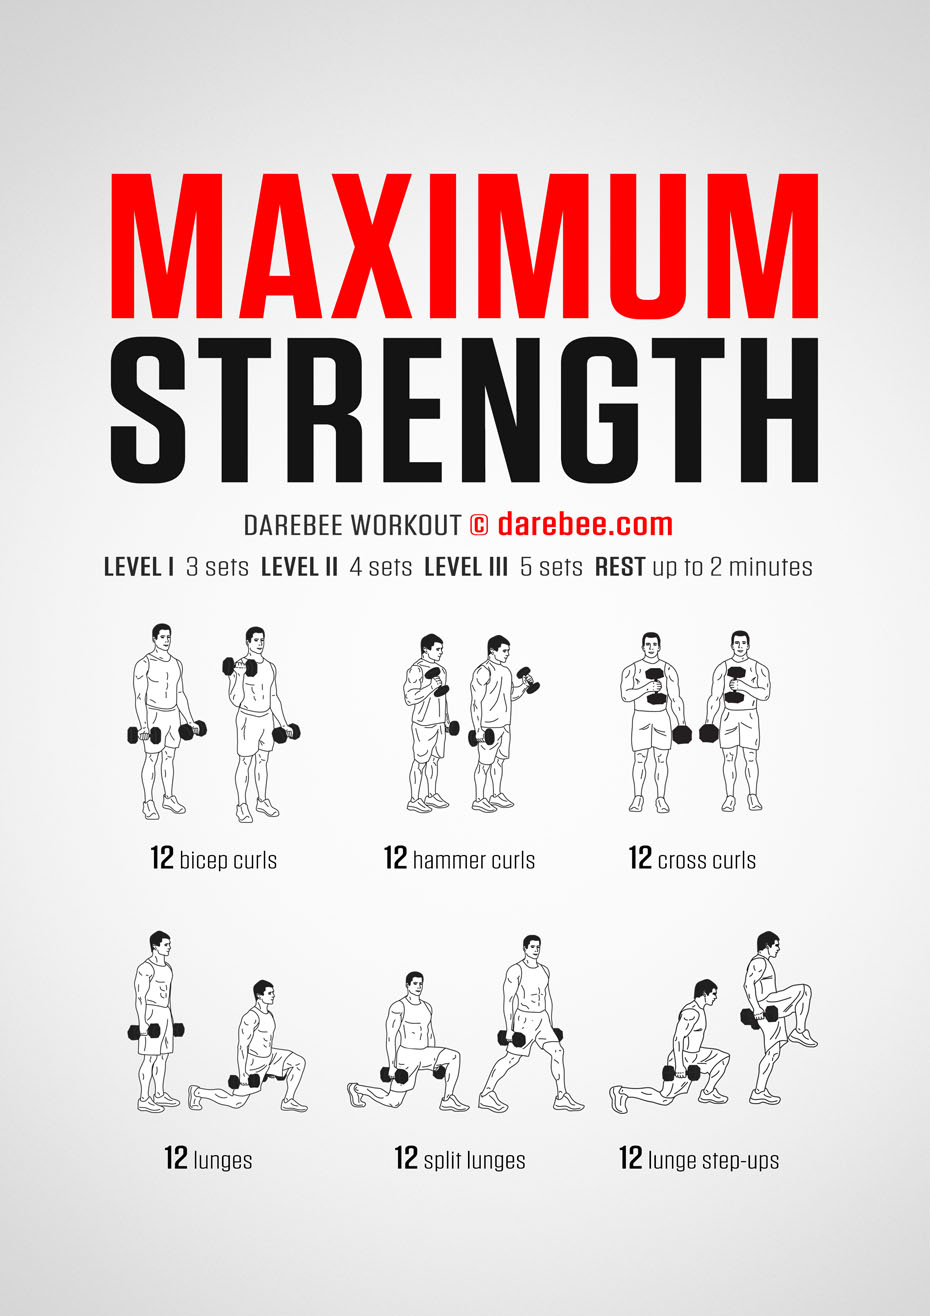 Maximum Strength is a DAREBEE total body strength and conditioning workout designed to help you develop an overall stronger body.